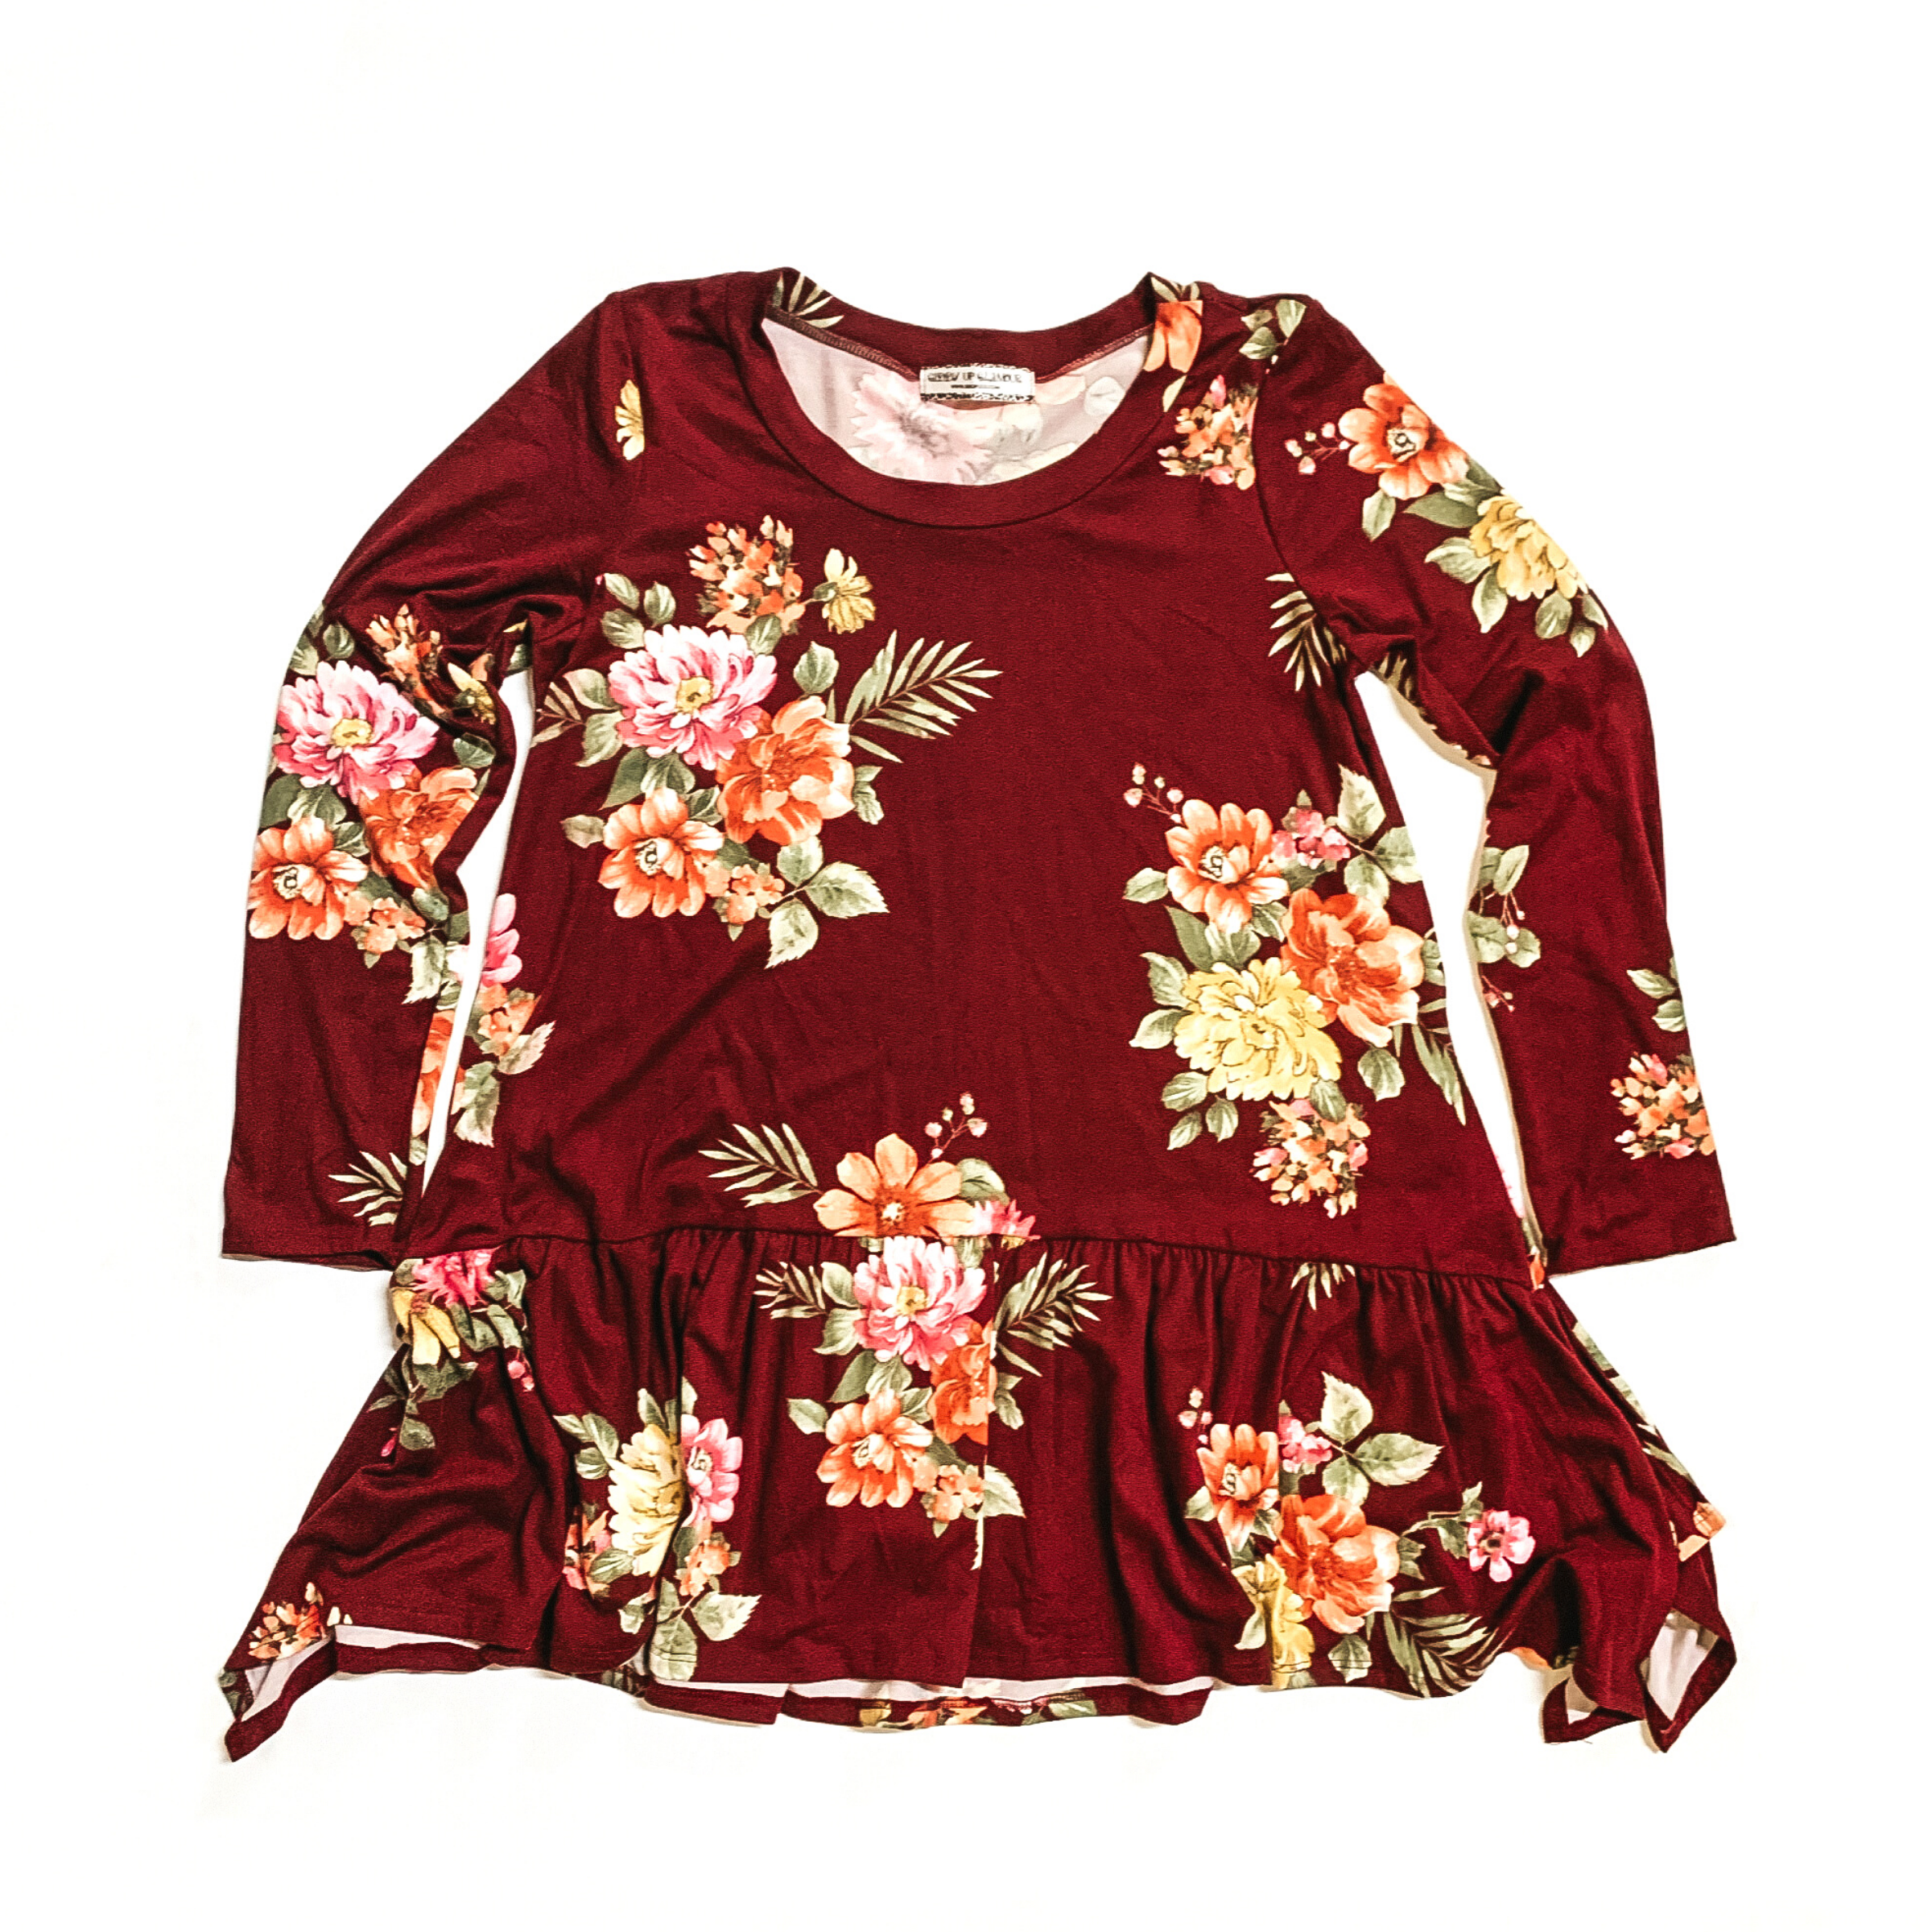 Last Chance Size S |Free To Wander Floral Long Sleeve Peplum Tunic in Maroon - Giddy Up Glamour Boutique